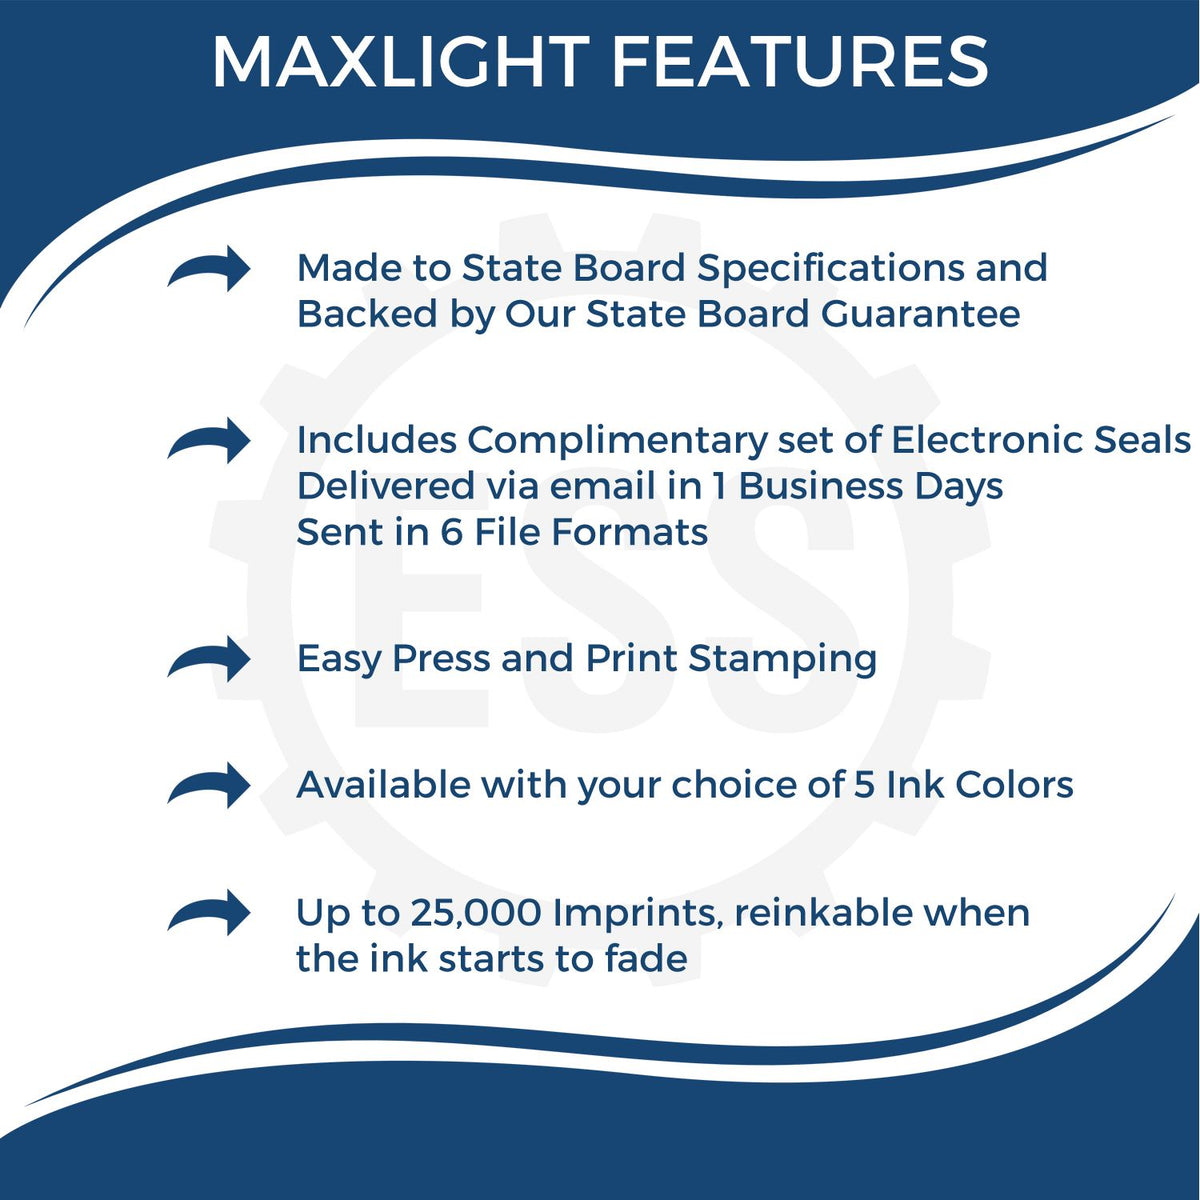 A picture of an infographic highlighting the selling points for the MaxLight Premium Pre-Inked New Mexico State Seal Notarial Stamp